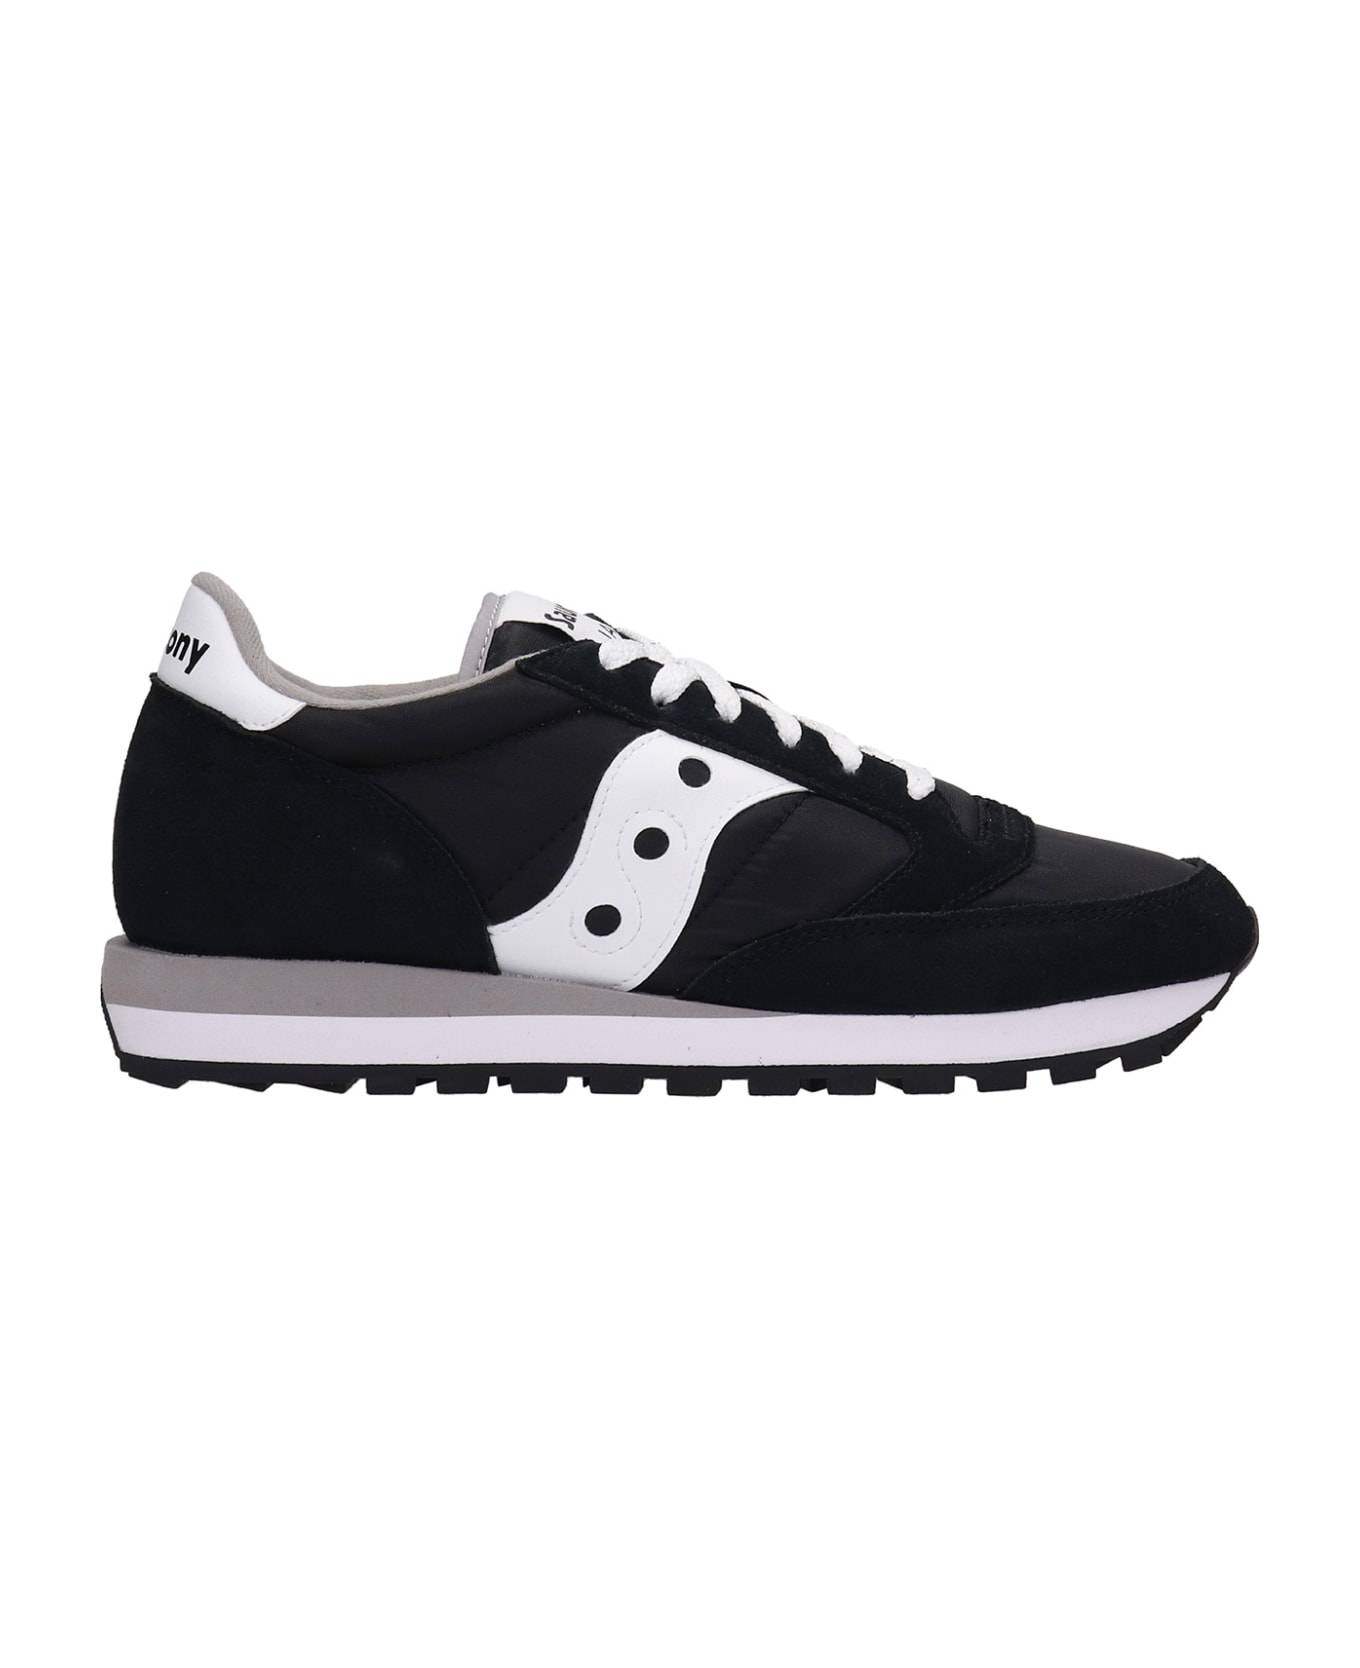 Saucony Jazz Original Sneakers In Black Suede And Fabric - Blk/wht スニーカー